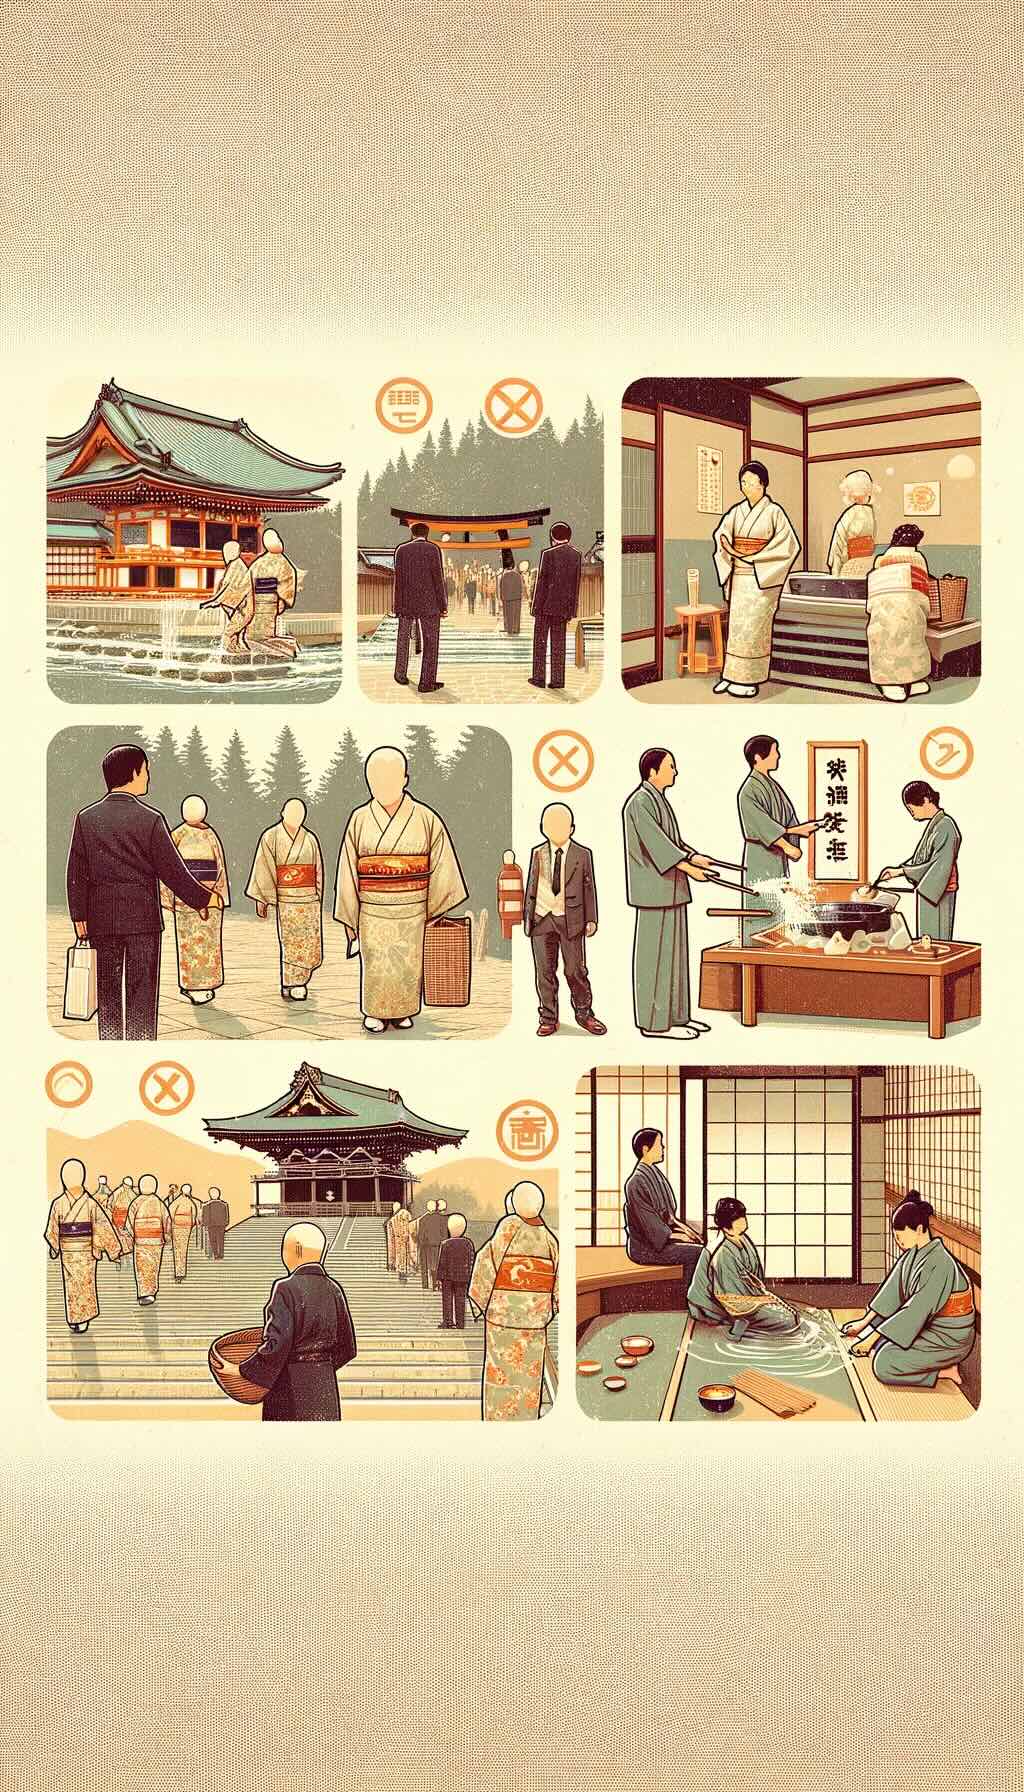 Cultural etiquette of Japan illustrates various aspects of Japanese customs and practices, from purification rituals at temples to respectful interactions with locals and traditional onsen etiquette